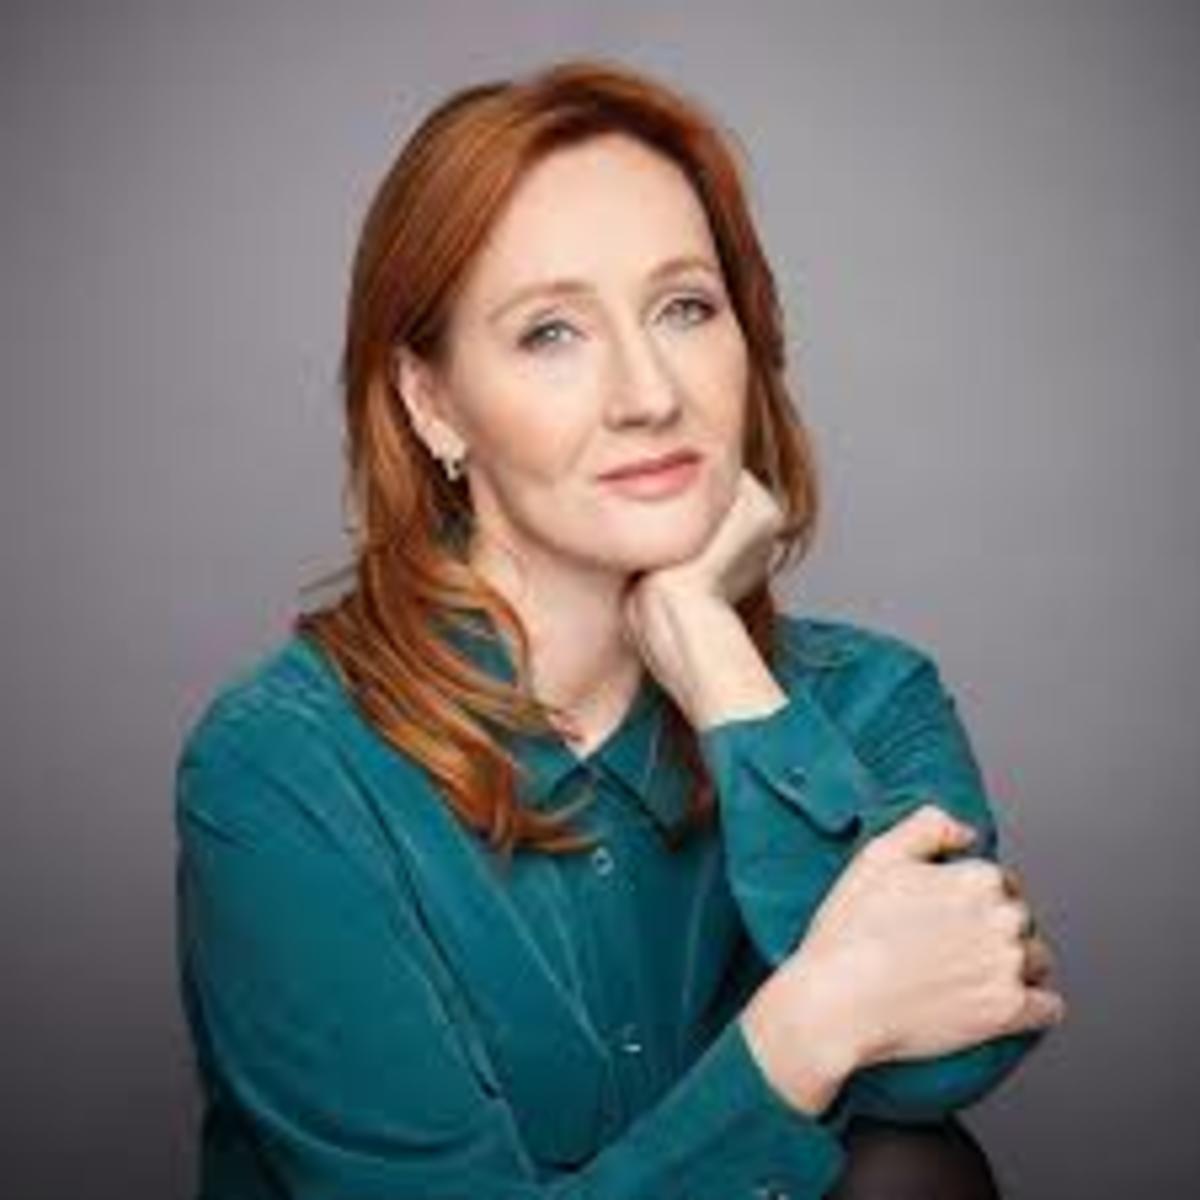 10 Things You Didn't Know About J. K. Rowling